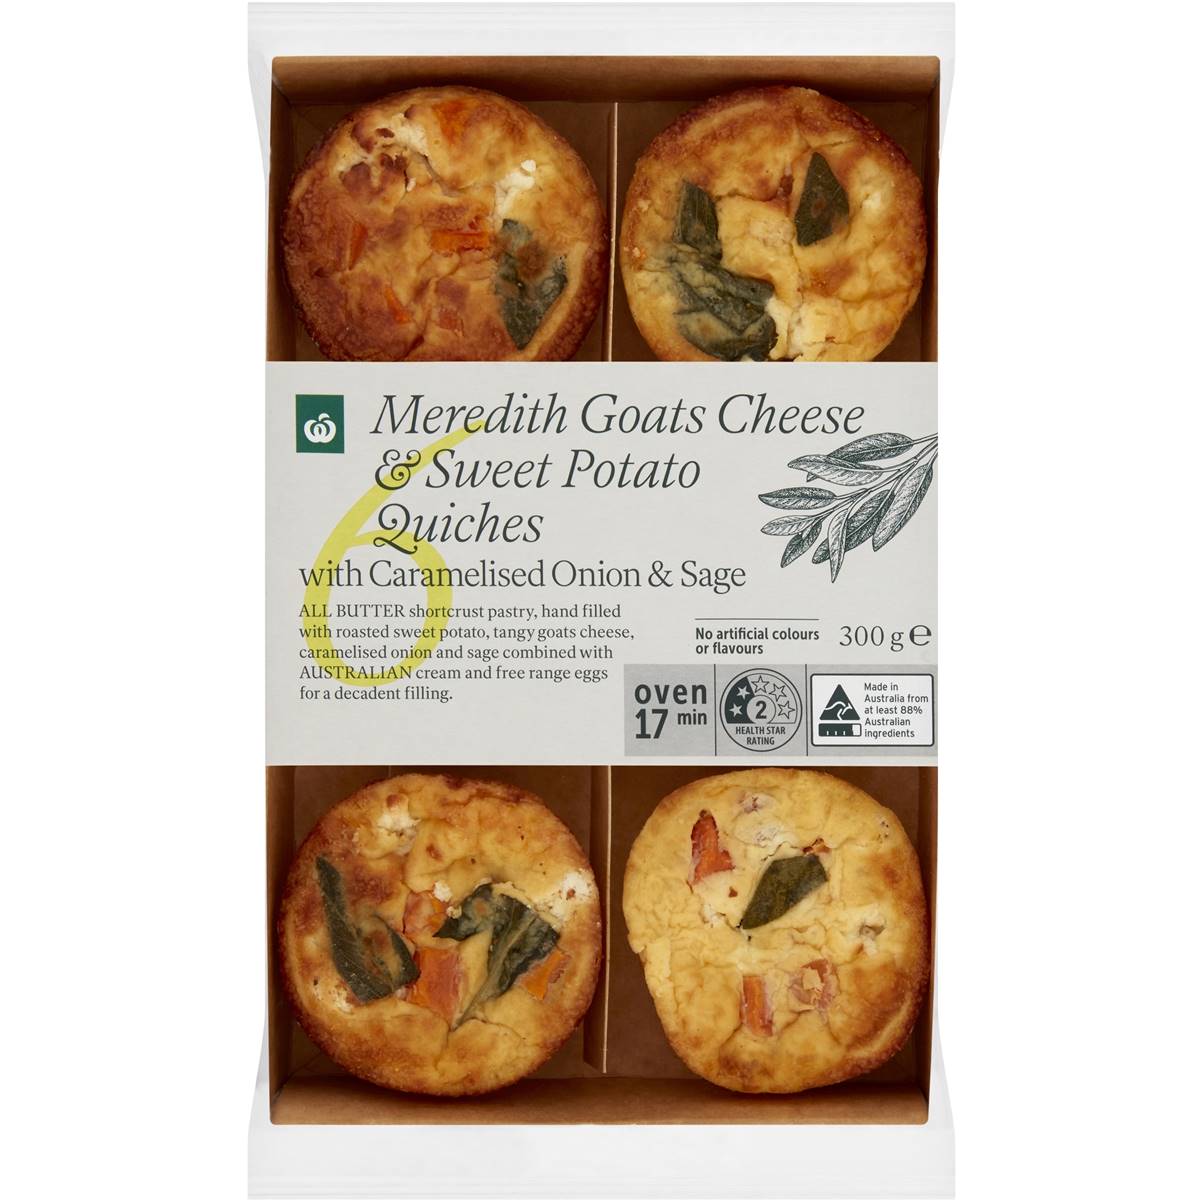 Calories in Woolworths Meredith Goats Cheese & Sweet Potato Mini Quiches